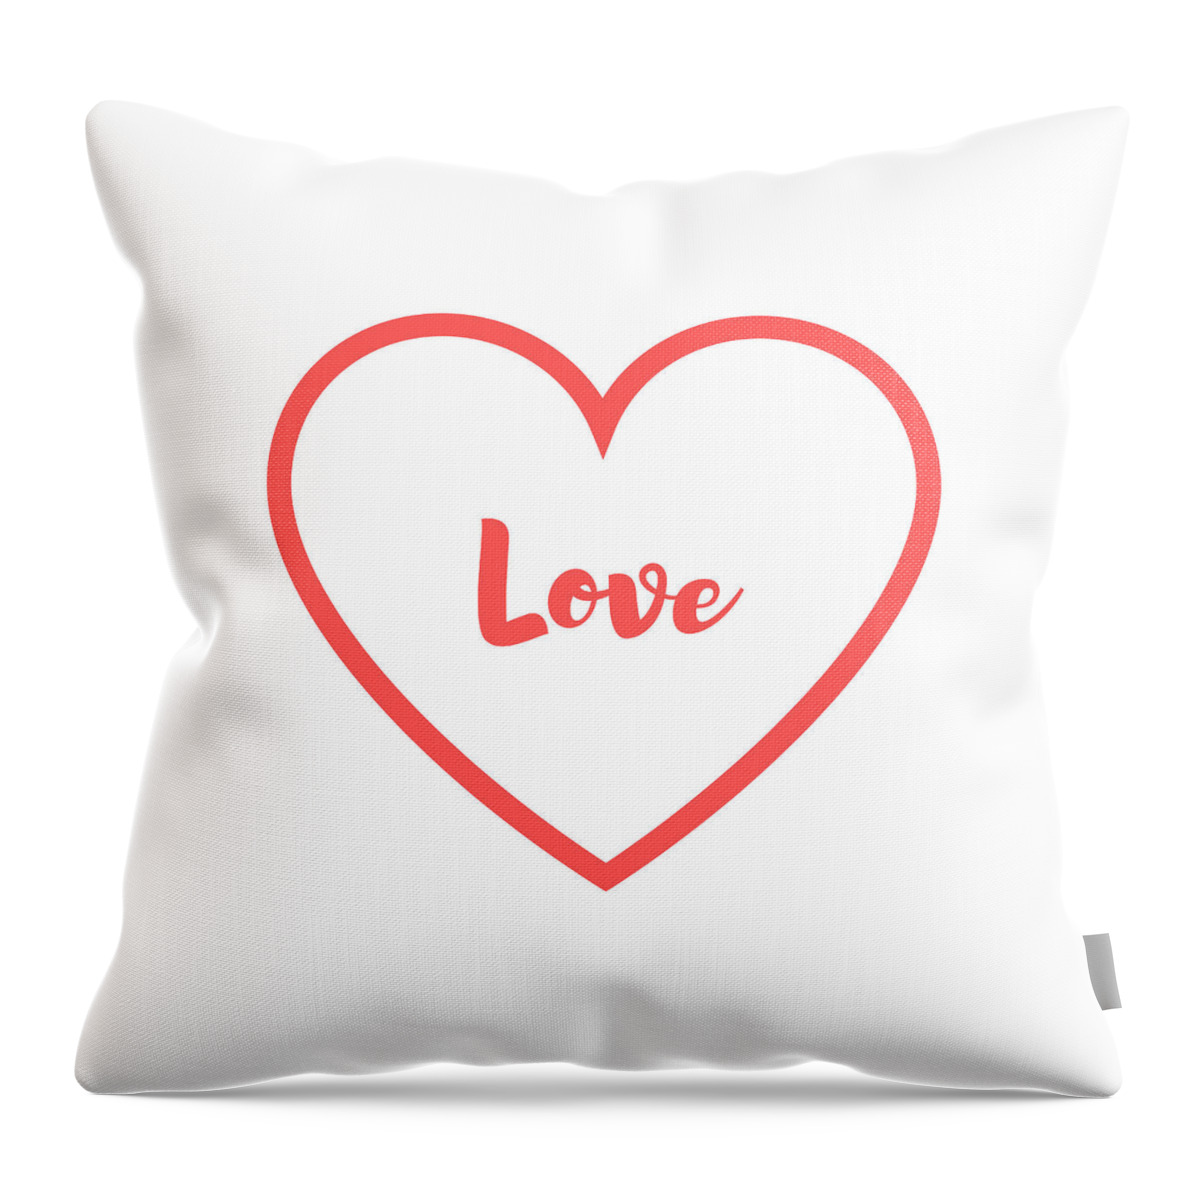 Love Throw Pillow featuring the digital art Pink Love by Rosemary Nagorner